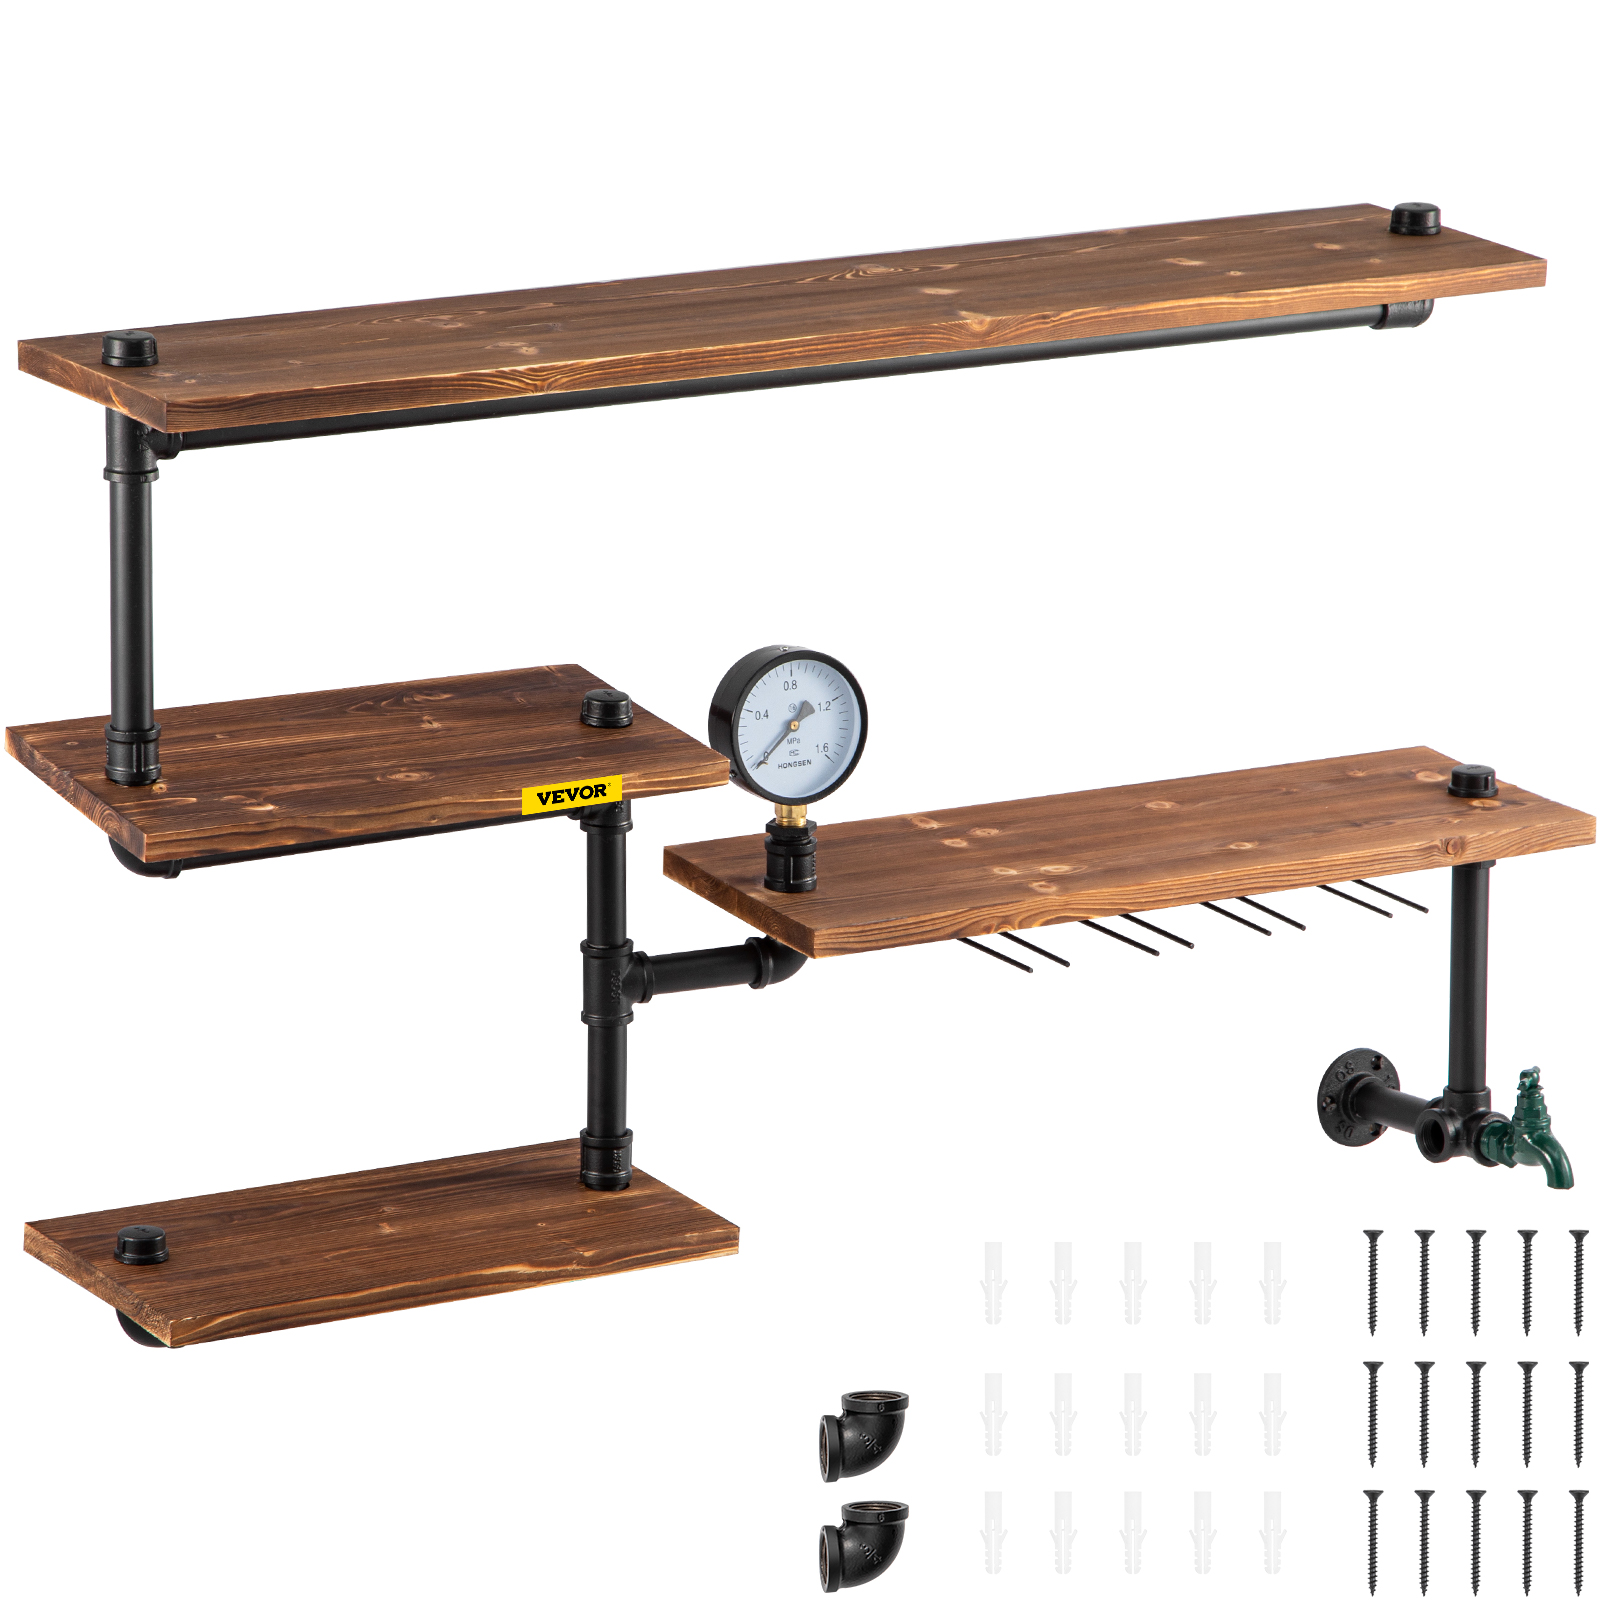 made from 20mm electrical pipe. Black Industrial steel pipe shelf brackets 